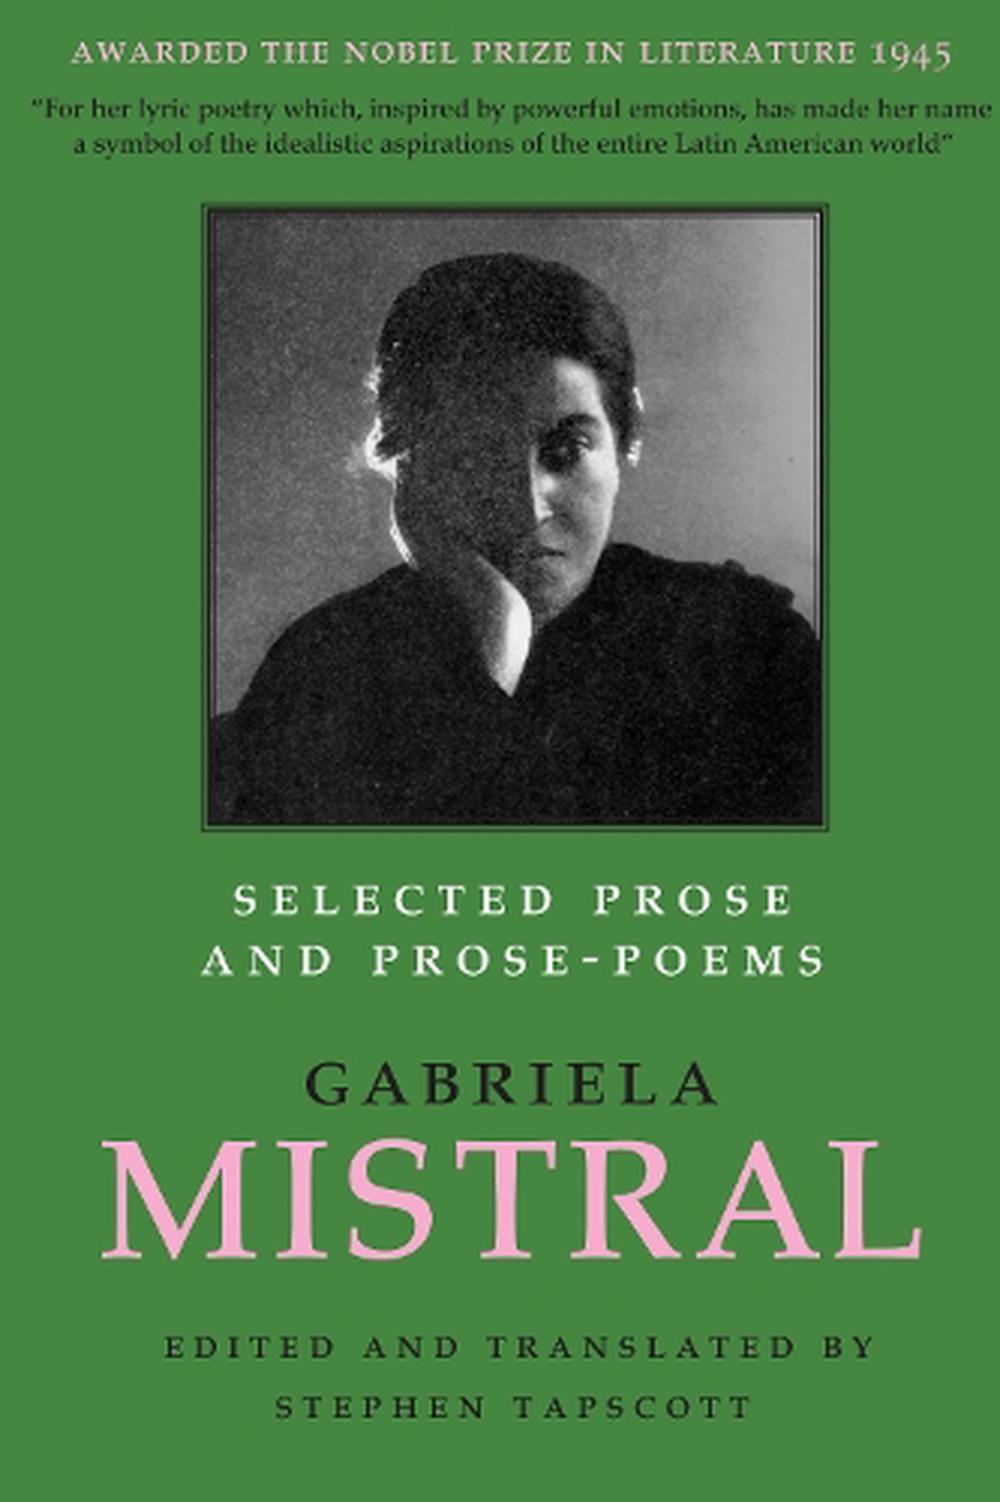 Selected Poems by Gabriela Mistral